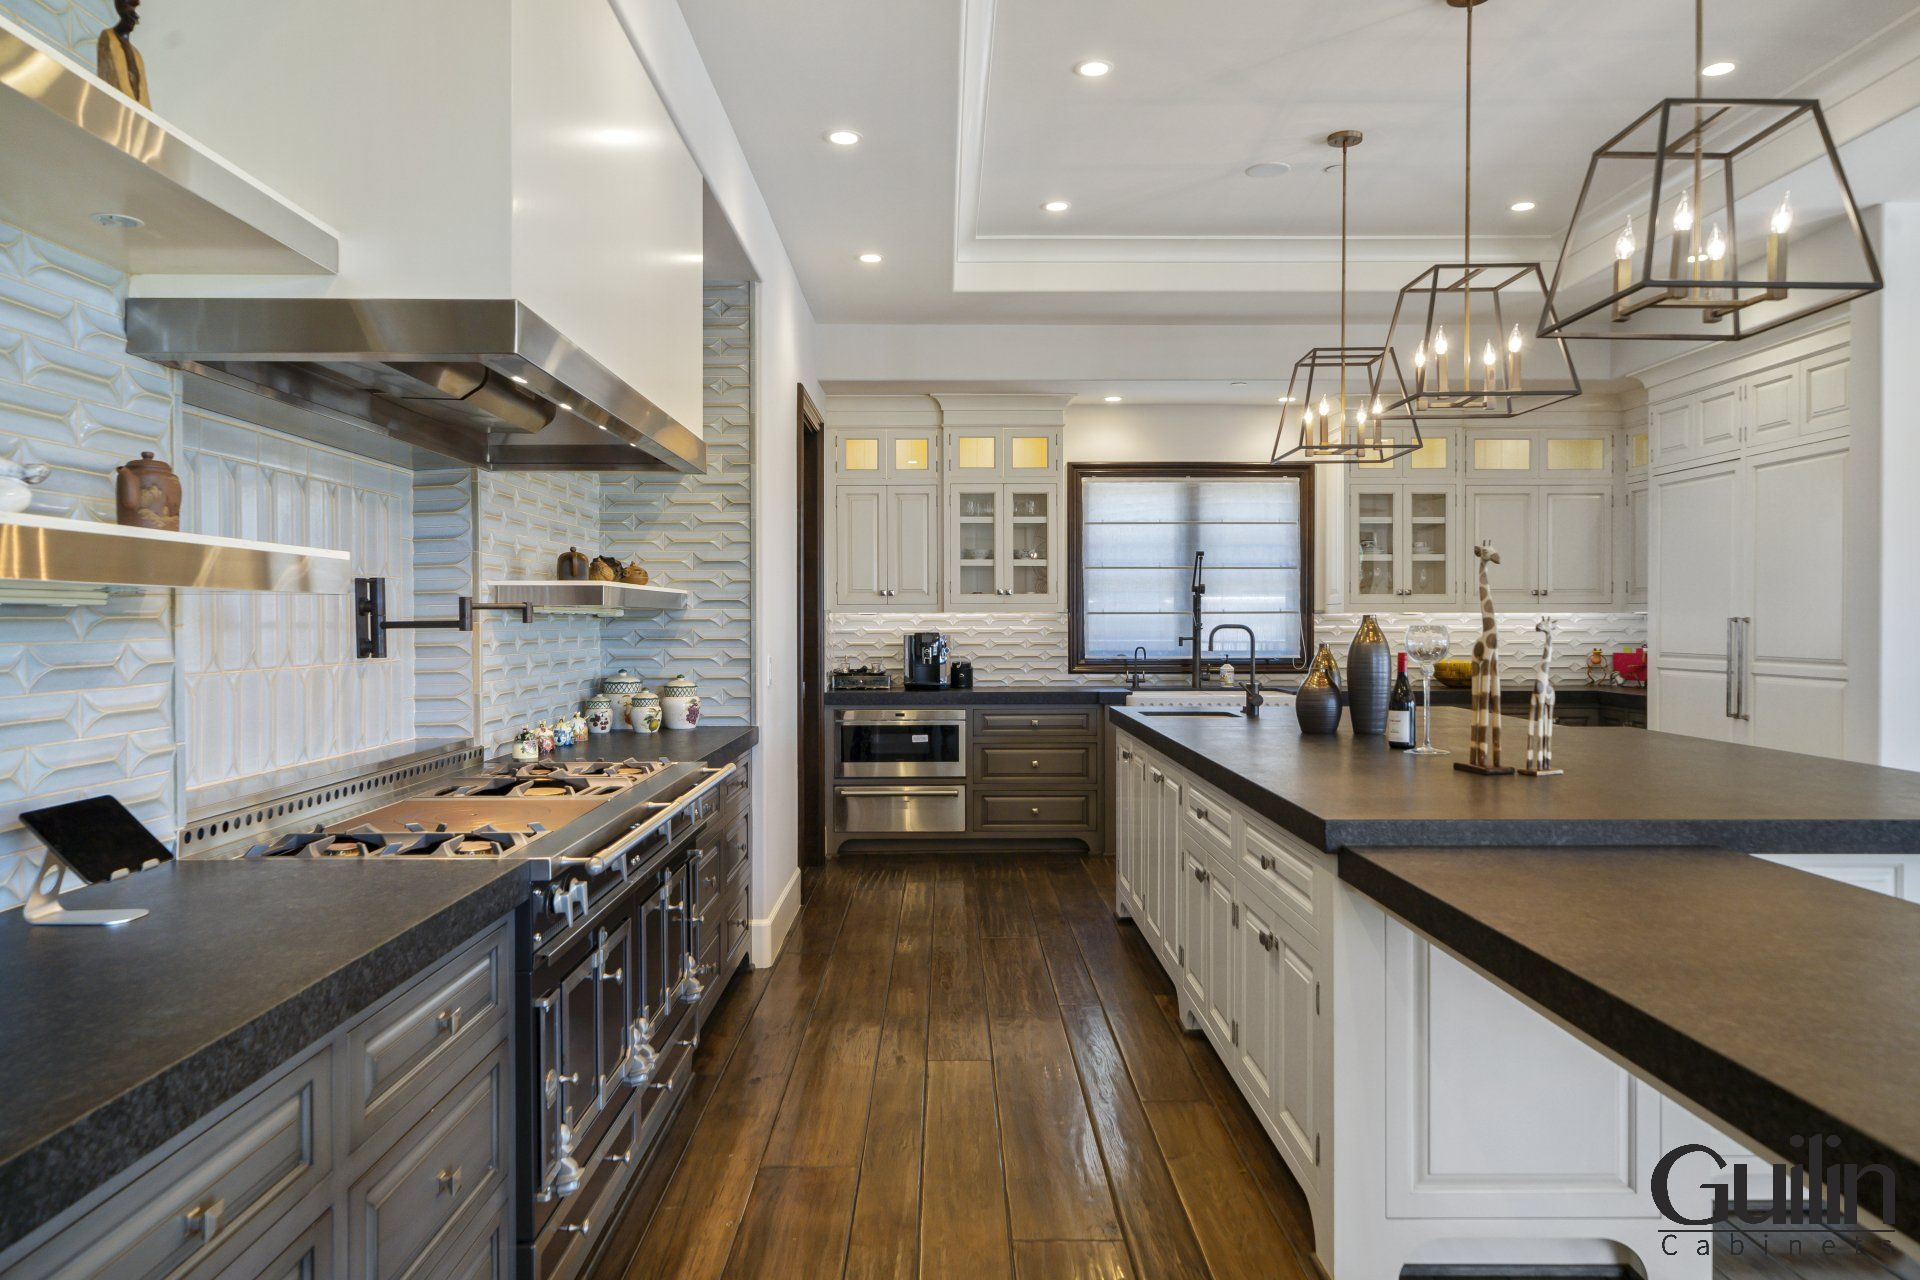 A Galley Kitchen is a kitchen layout that is popular for its efficiency and practicality. This type of kitchen layout consists of two parallel walls that are joined together, creating a long, narrow space. The counters, appliances, and storage units are all placed along the walls, leaving the center of the kitchen open for movement